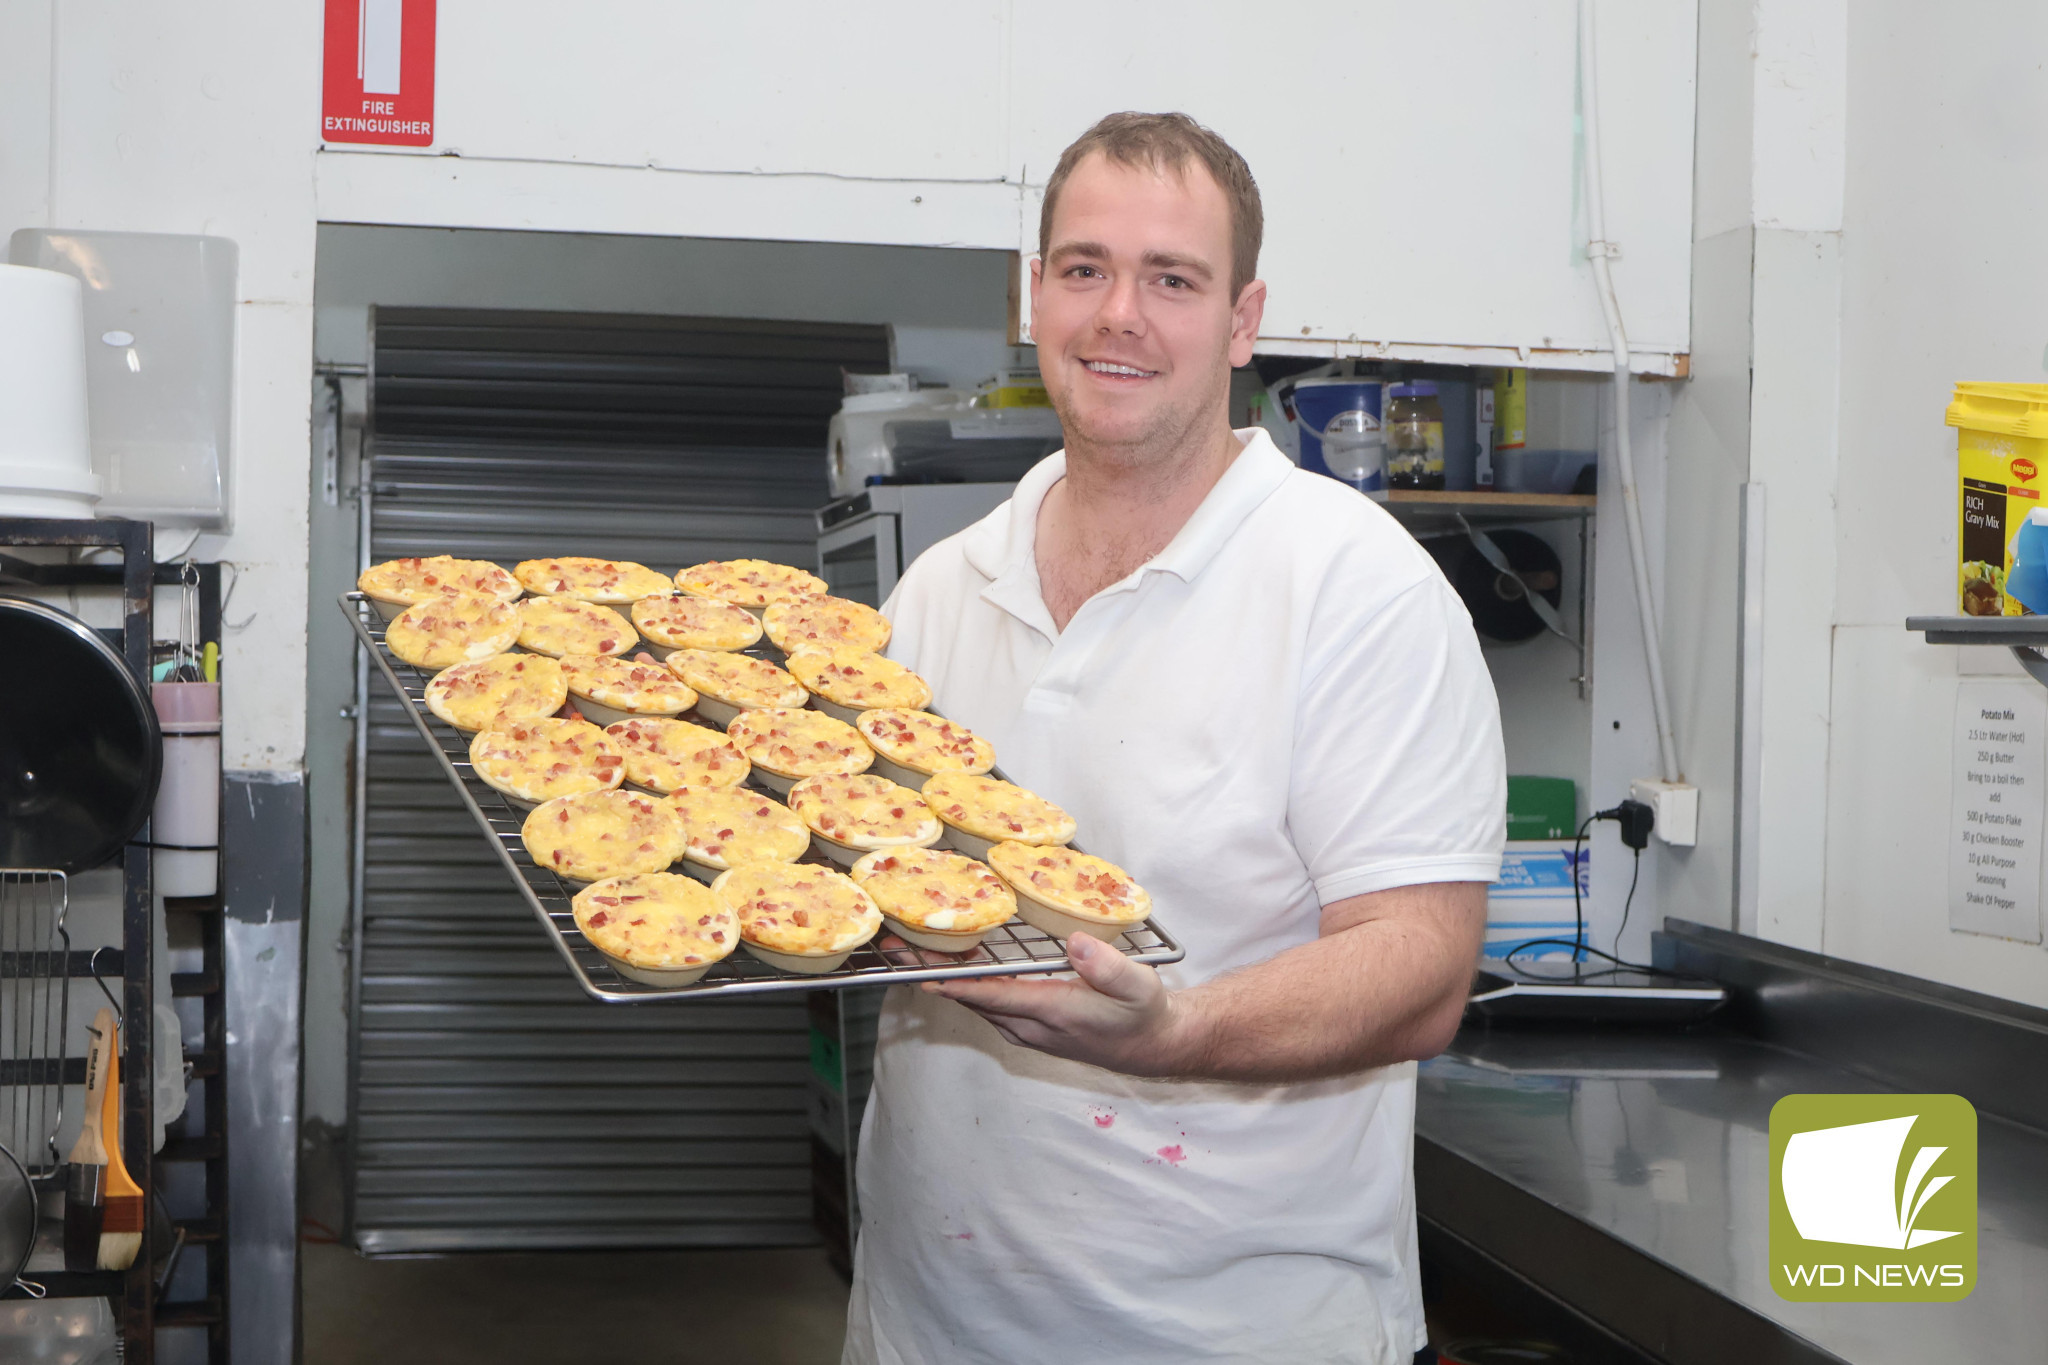 Oi Oi Oi: Brad Burkitt will be tasked with baking 48 gourmet lamb pies to represent Team Australia, which will be judged against New Zealand rivals.